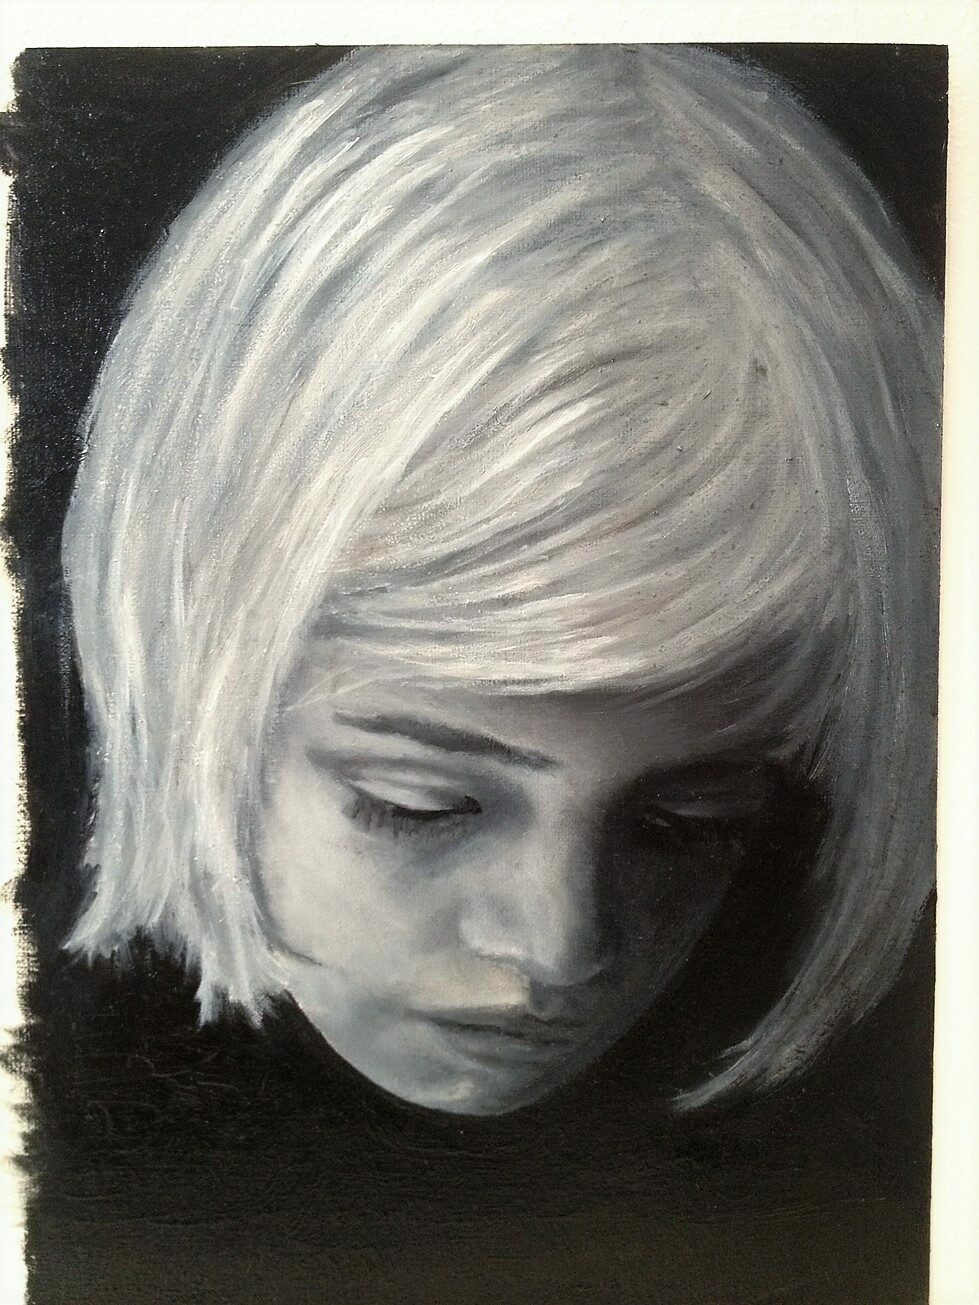 Black&White painting of girl with blond hair looking down